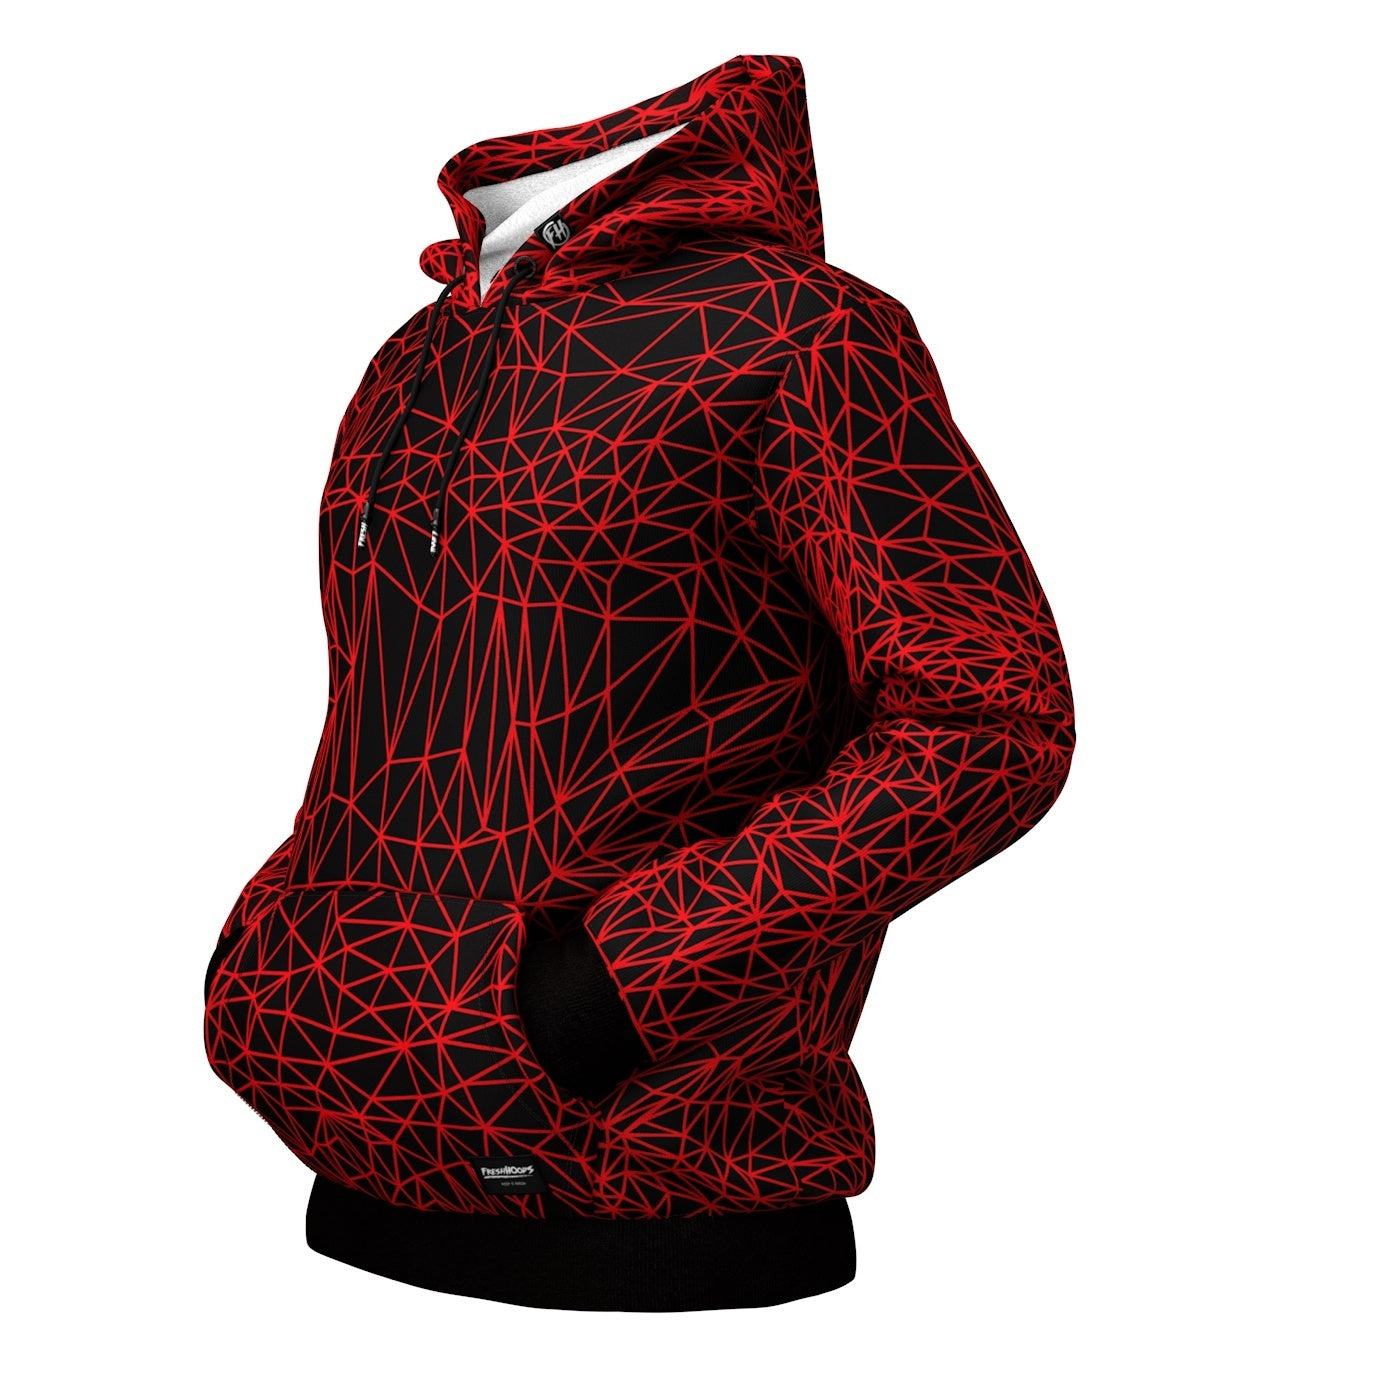 Abstract Red Polygons Hoodie